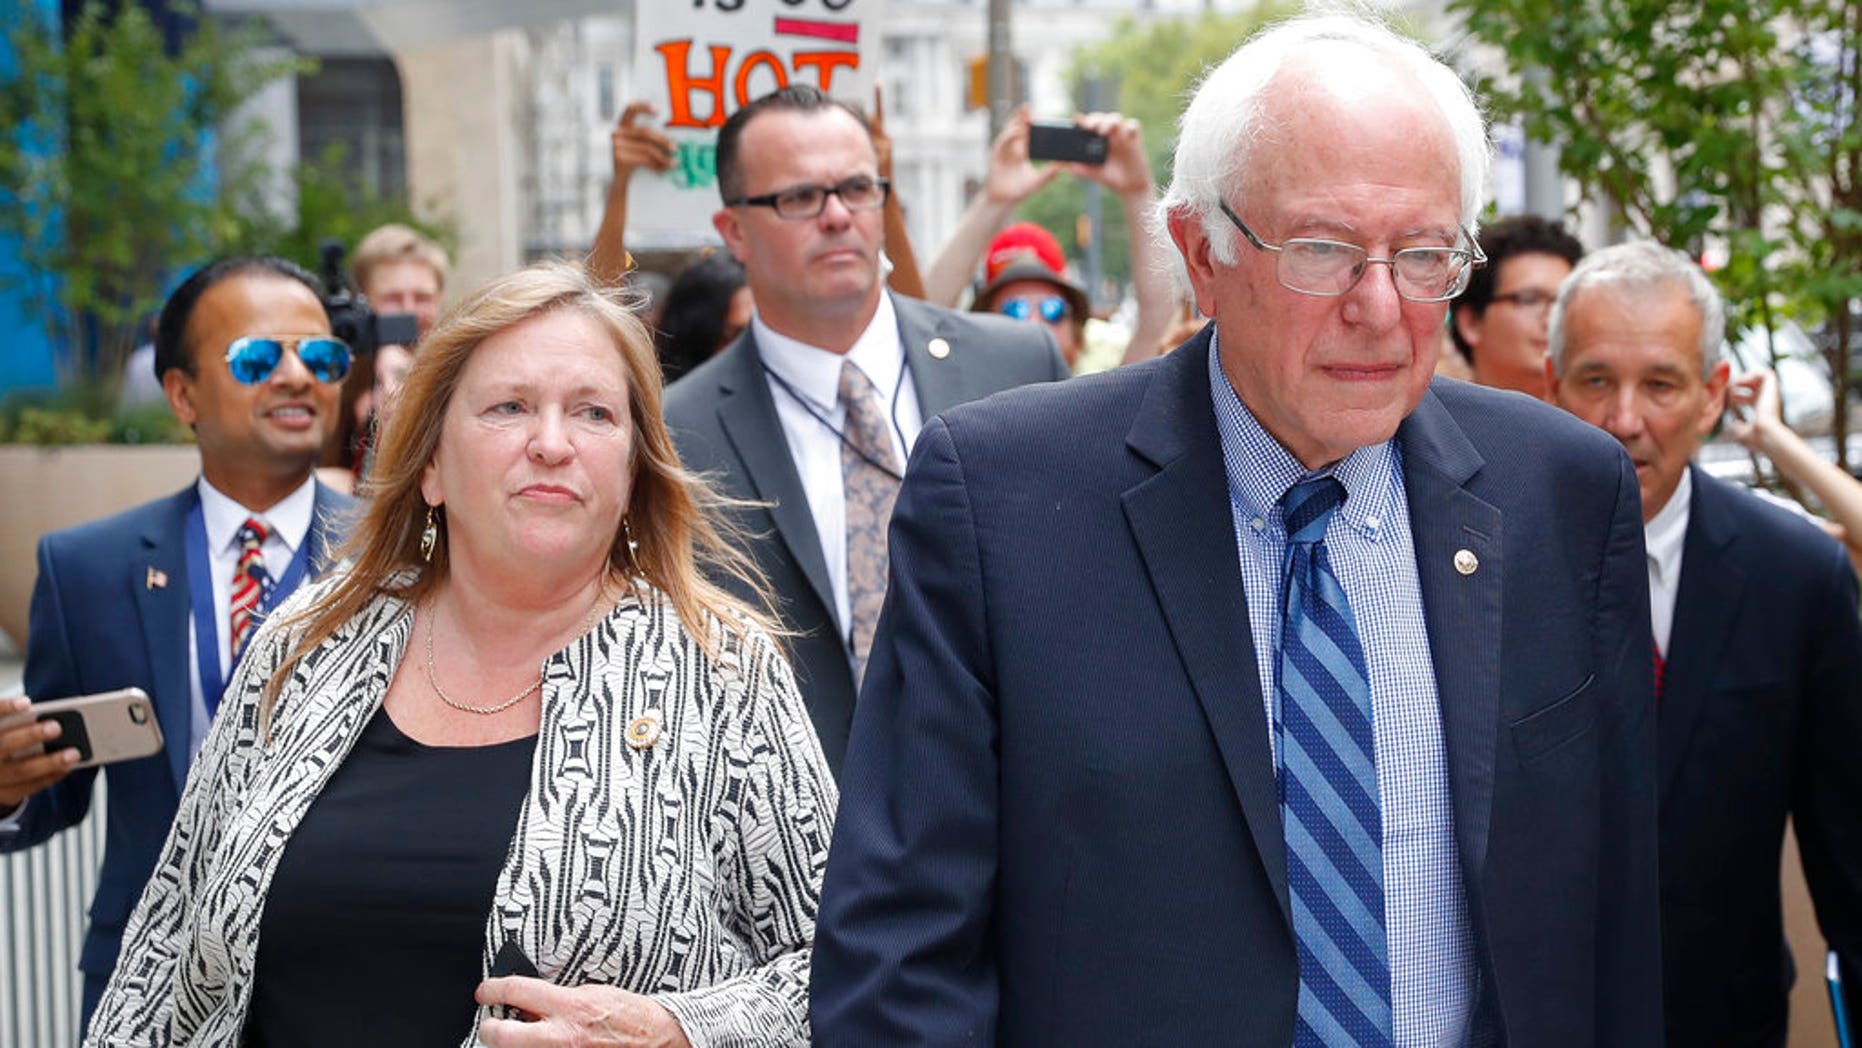 FILE--In this July 28, 2016 file photo, Sen. Bernie Sanders, I-Vt. and his wife Jane walk through downtown in Philadelphia during the final day of the Democratic National Convention. Sanders and his wife Jane O'Meara Sanders have hired lawyers in the face of federal investigations into the finances of the now-defunct Burlington College, which closed last year due, many feel, to debts incurred when Jane Sanders entered into an ill-advised real estate deal. (AP Photo/John Minchillo, File)